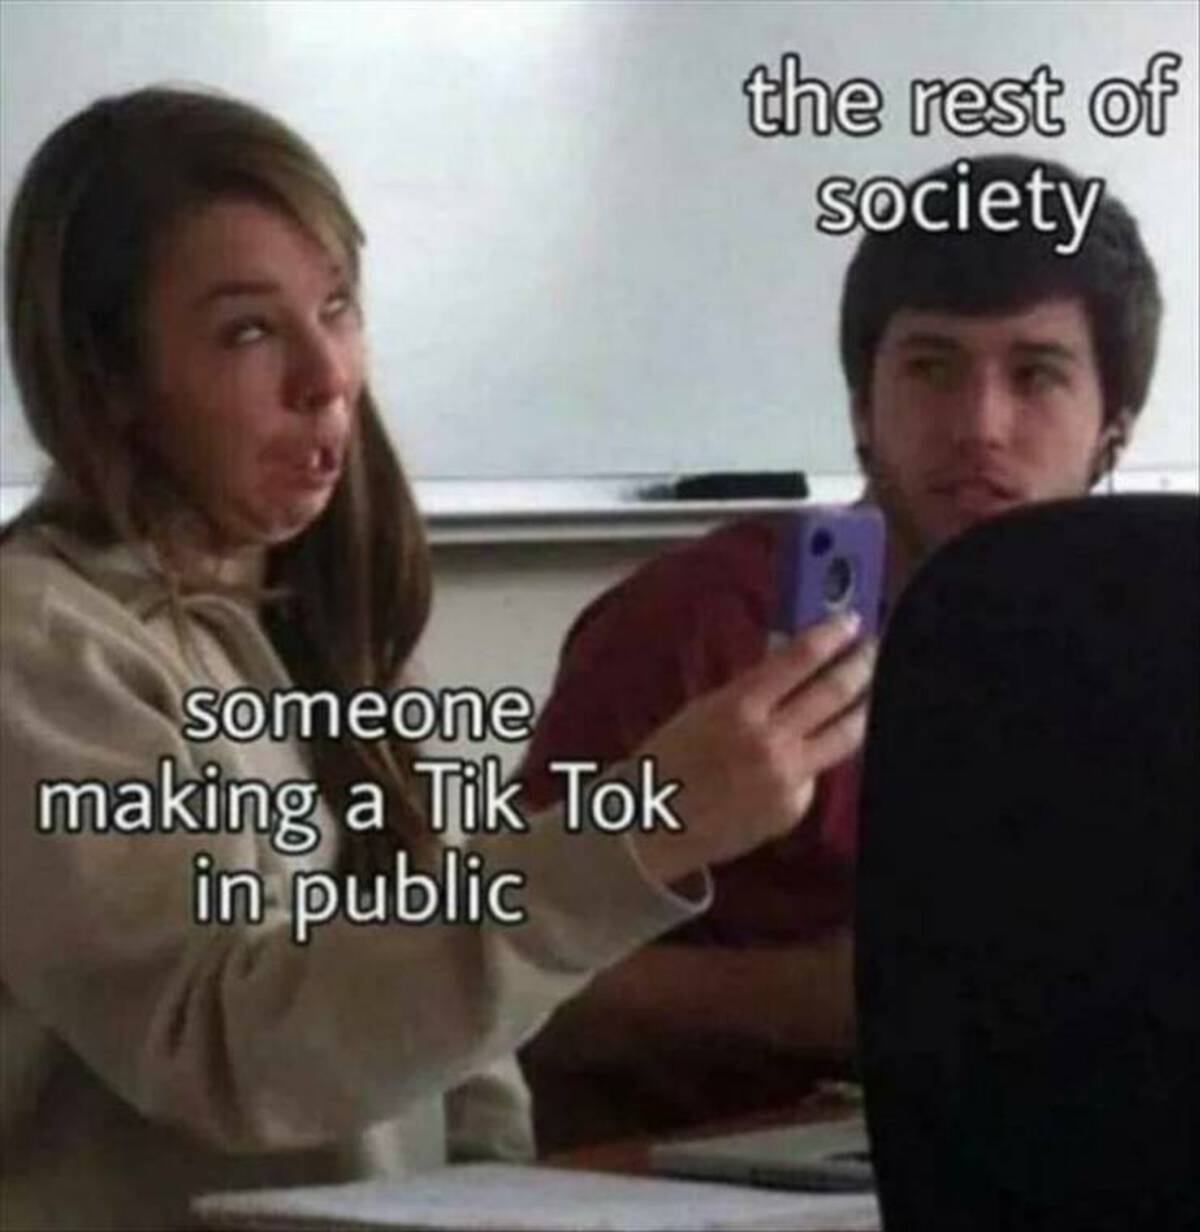 photo caption - someone making a Tik Tok in public the rest of Society